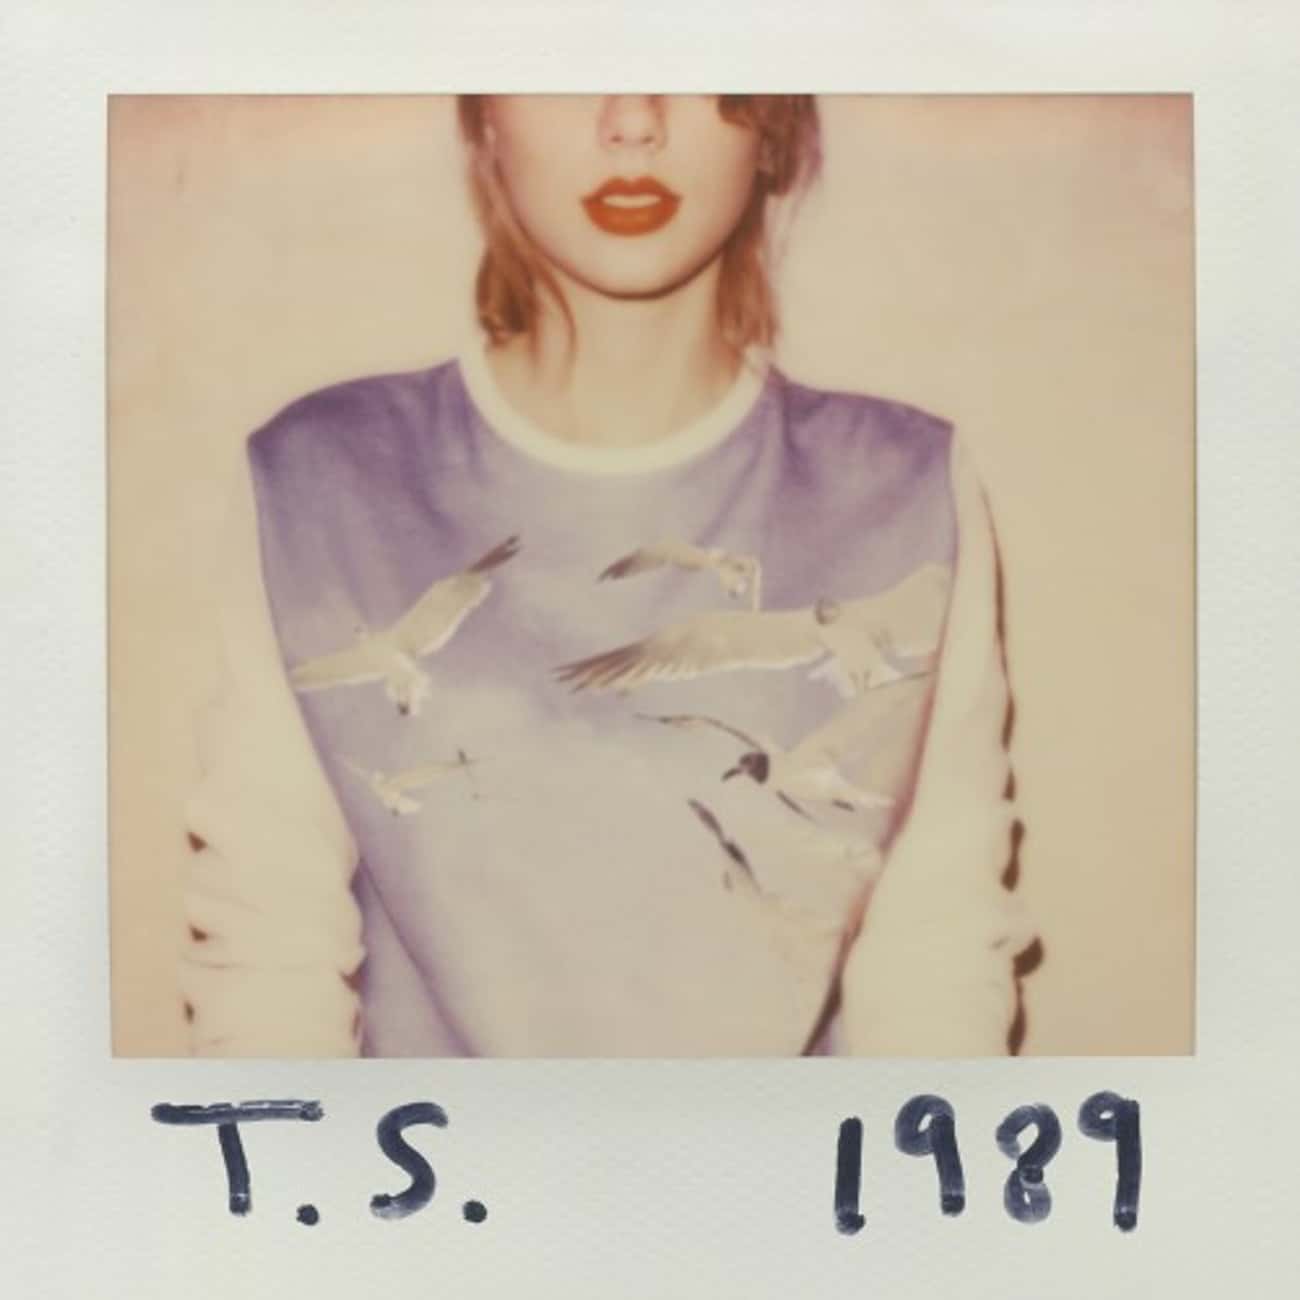 When She Released '1989' (October 2014)